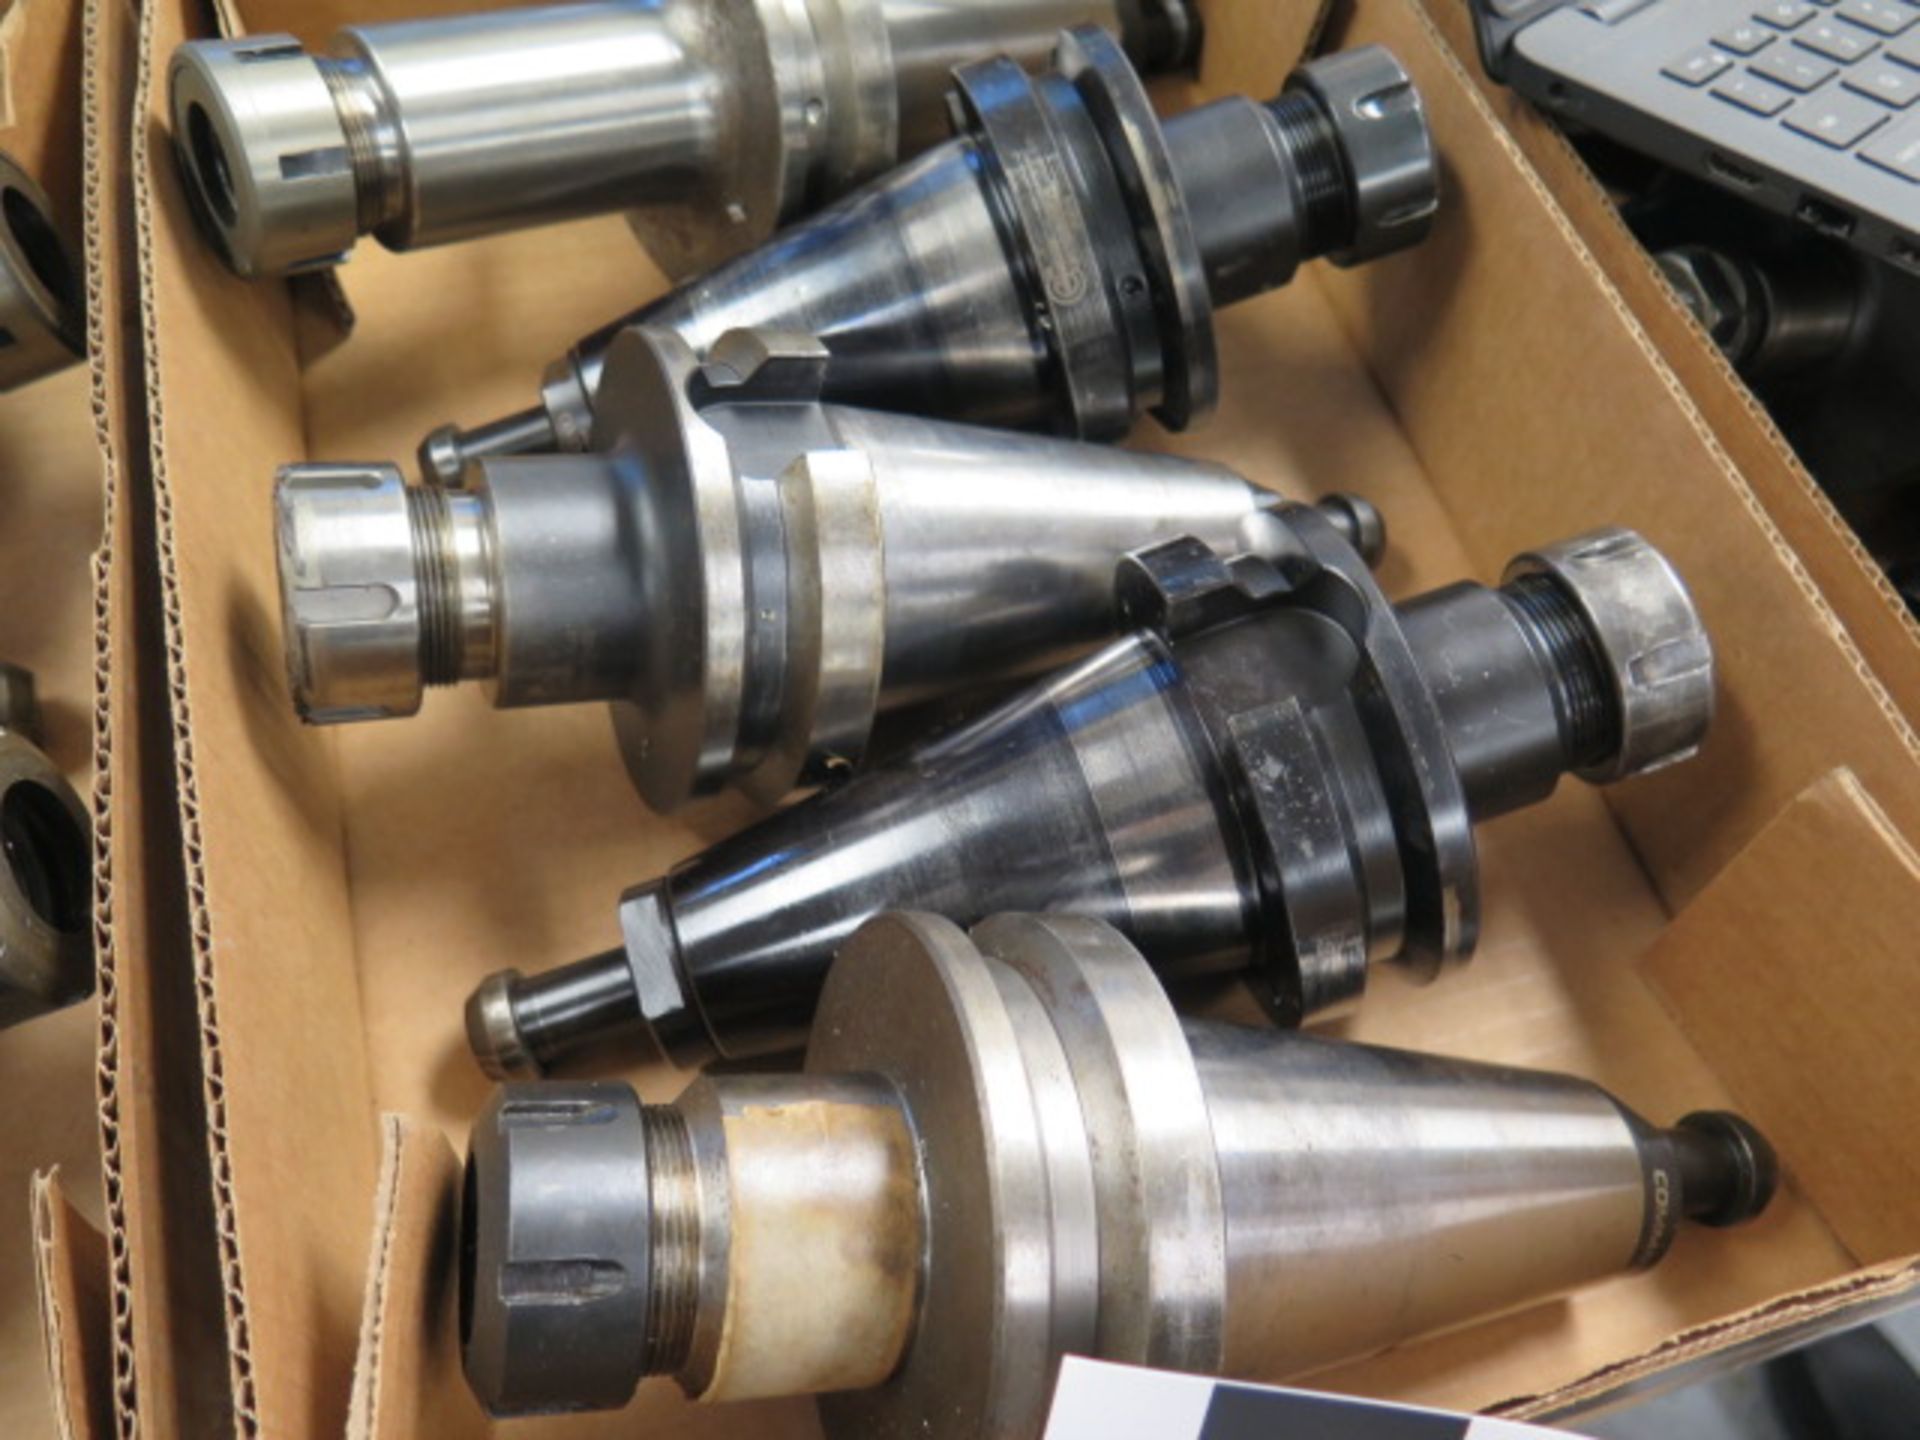 BT-50 Taper ER32 Collet Chucks (5) (SOLD AS-IS - NO WARRANTY) (Located @ 2229 Ringwood Ave. San Jose - Image 4 of 6